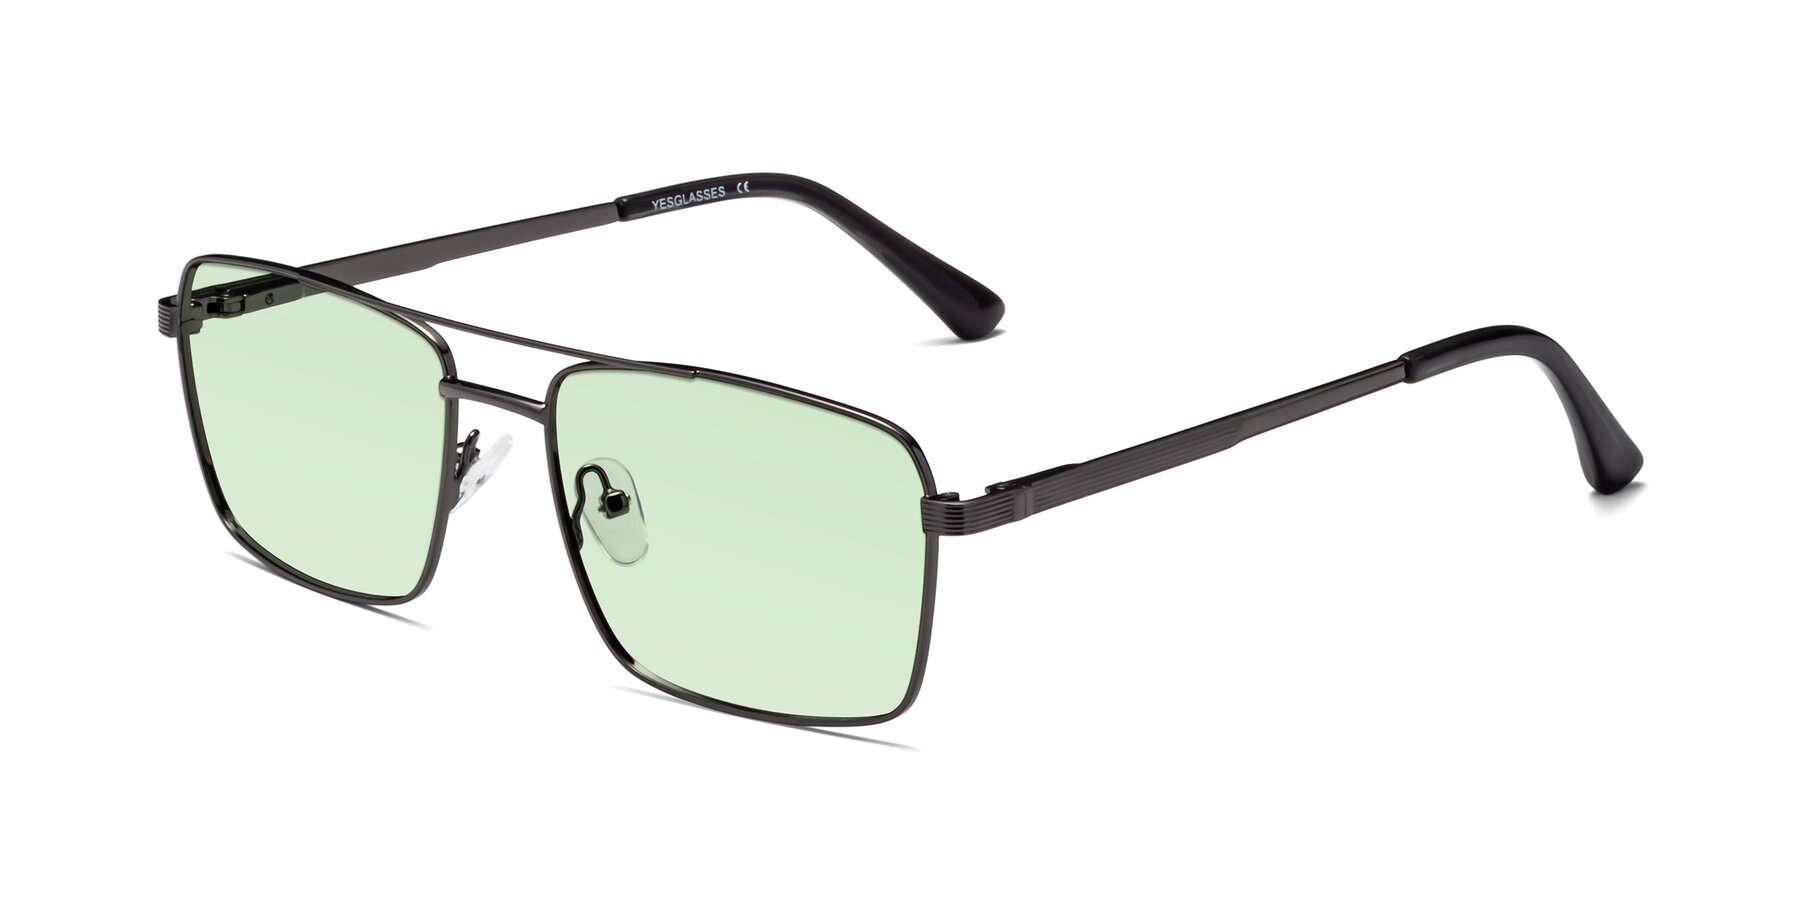 Angle of Beckum in Gunmetal with Light Green Tinted Lenses